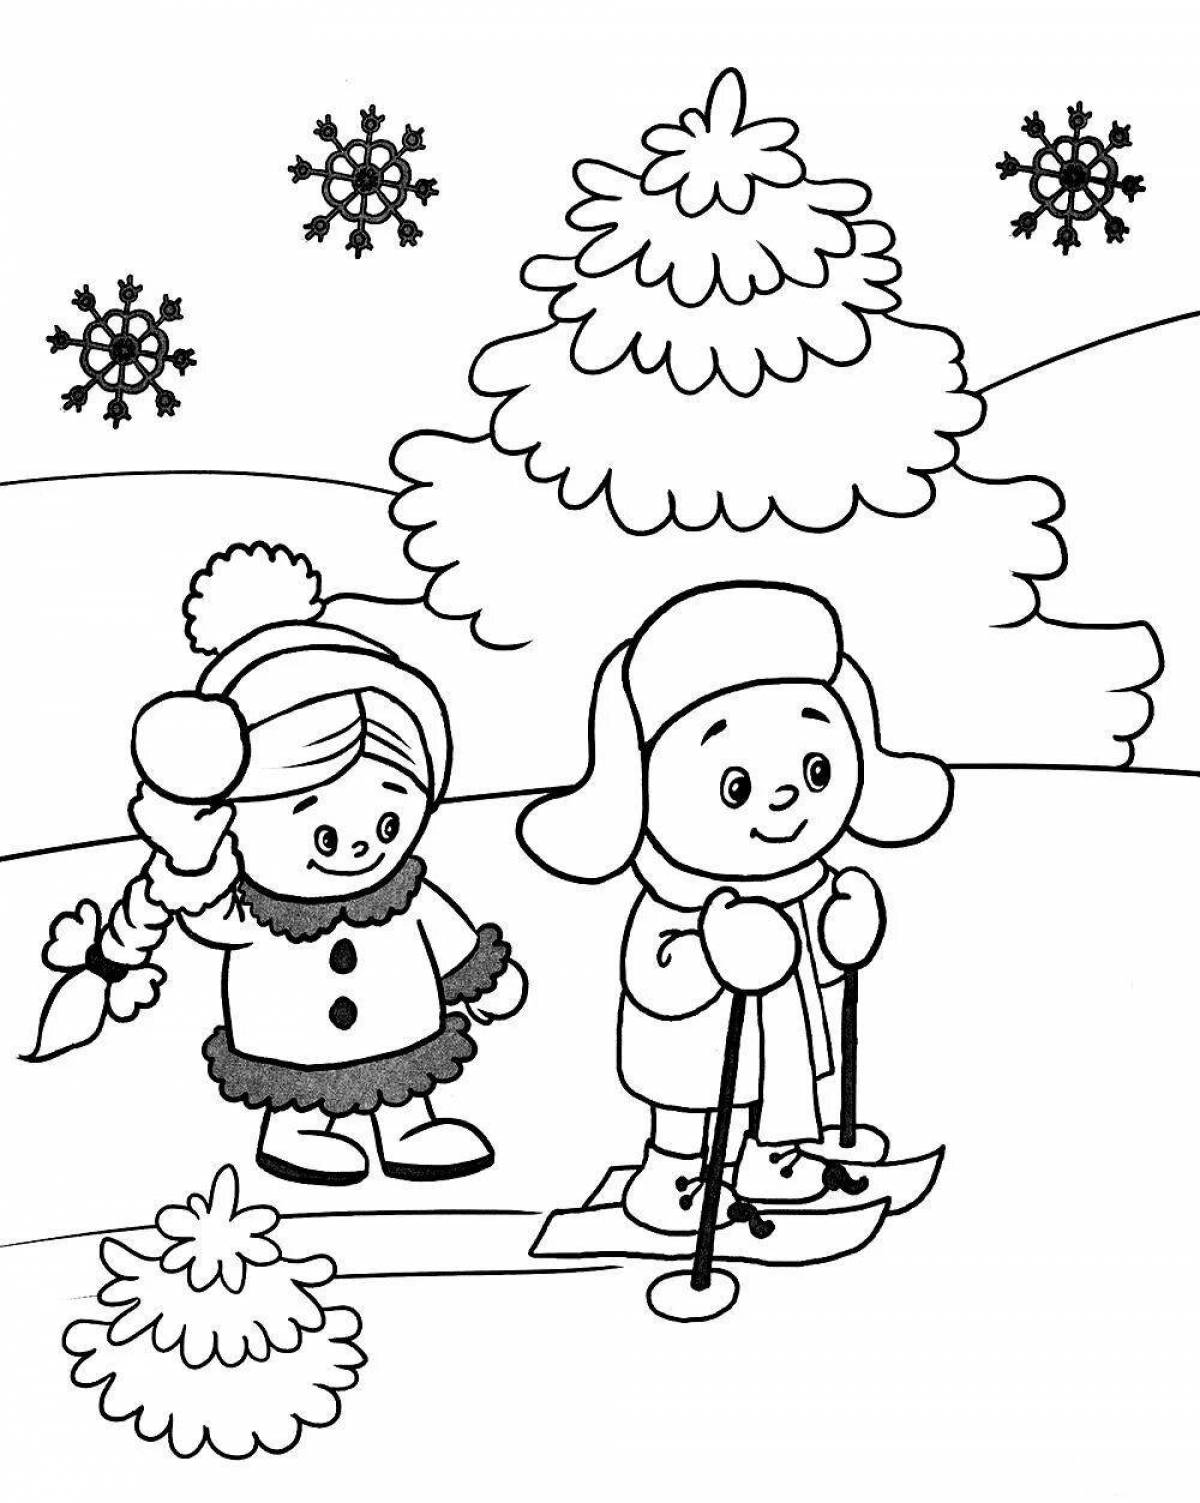 Invitation coloring winter games for kids